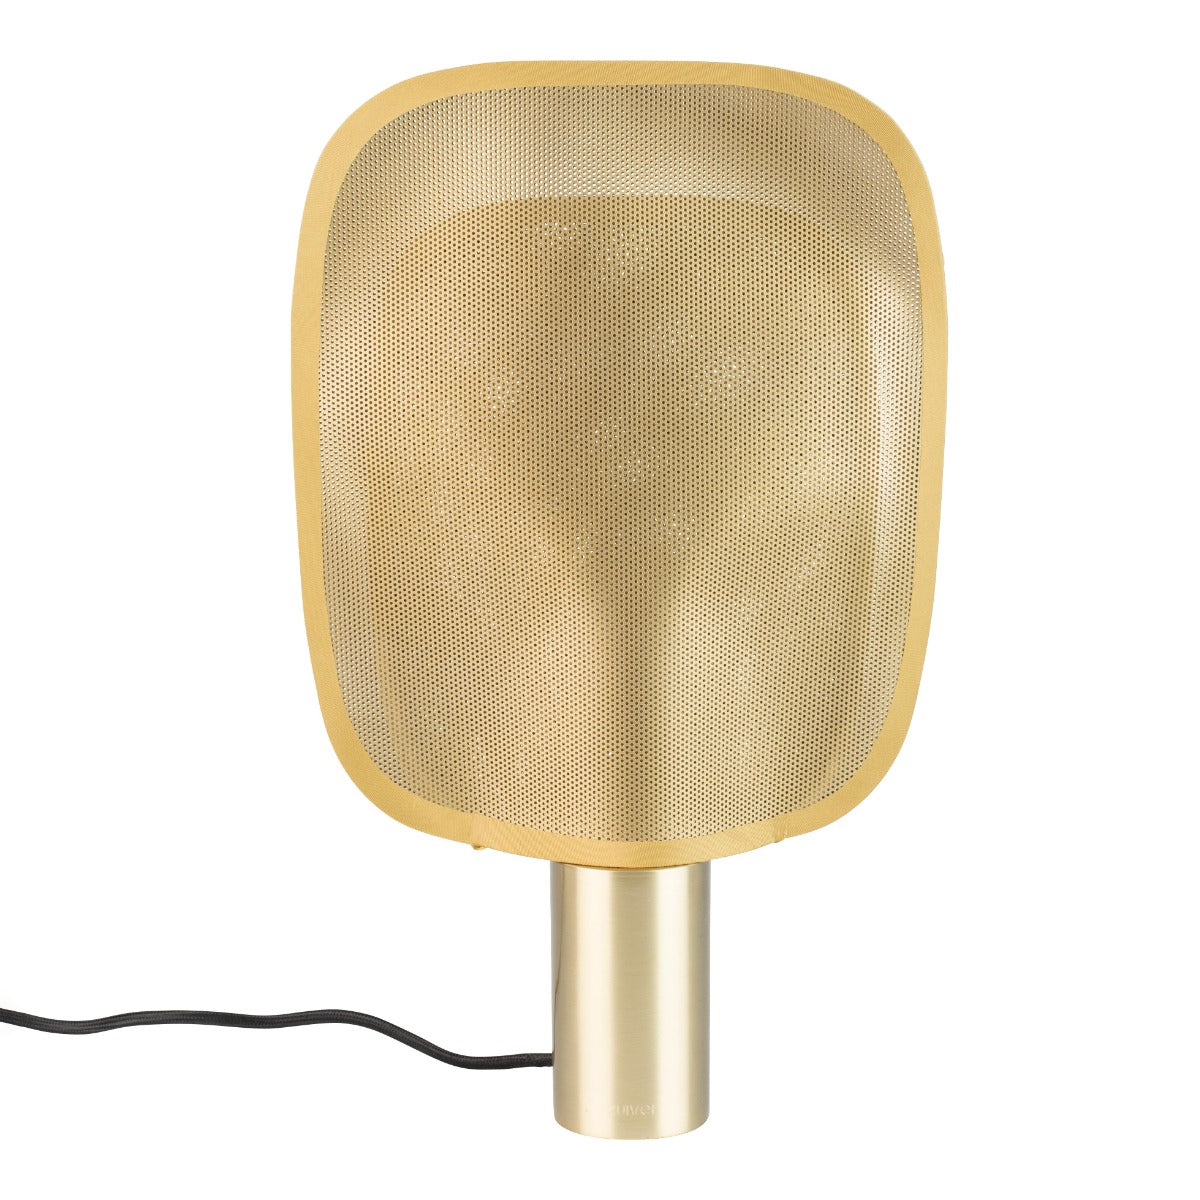 Mai table lamp is a unique proposition that, when turned on, creates an amazing effect, shiny light. Without turning on, it can also be a very interesting decorative object, it resembles a sculpture. Made of the highest quality plastic with an iron base, it will perfectly complement the modern interior of the bedroom, as well as a minimalist living room. Any place that needs coziness will like this headlight.